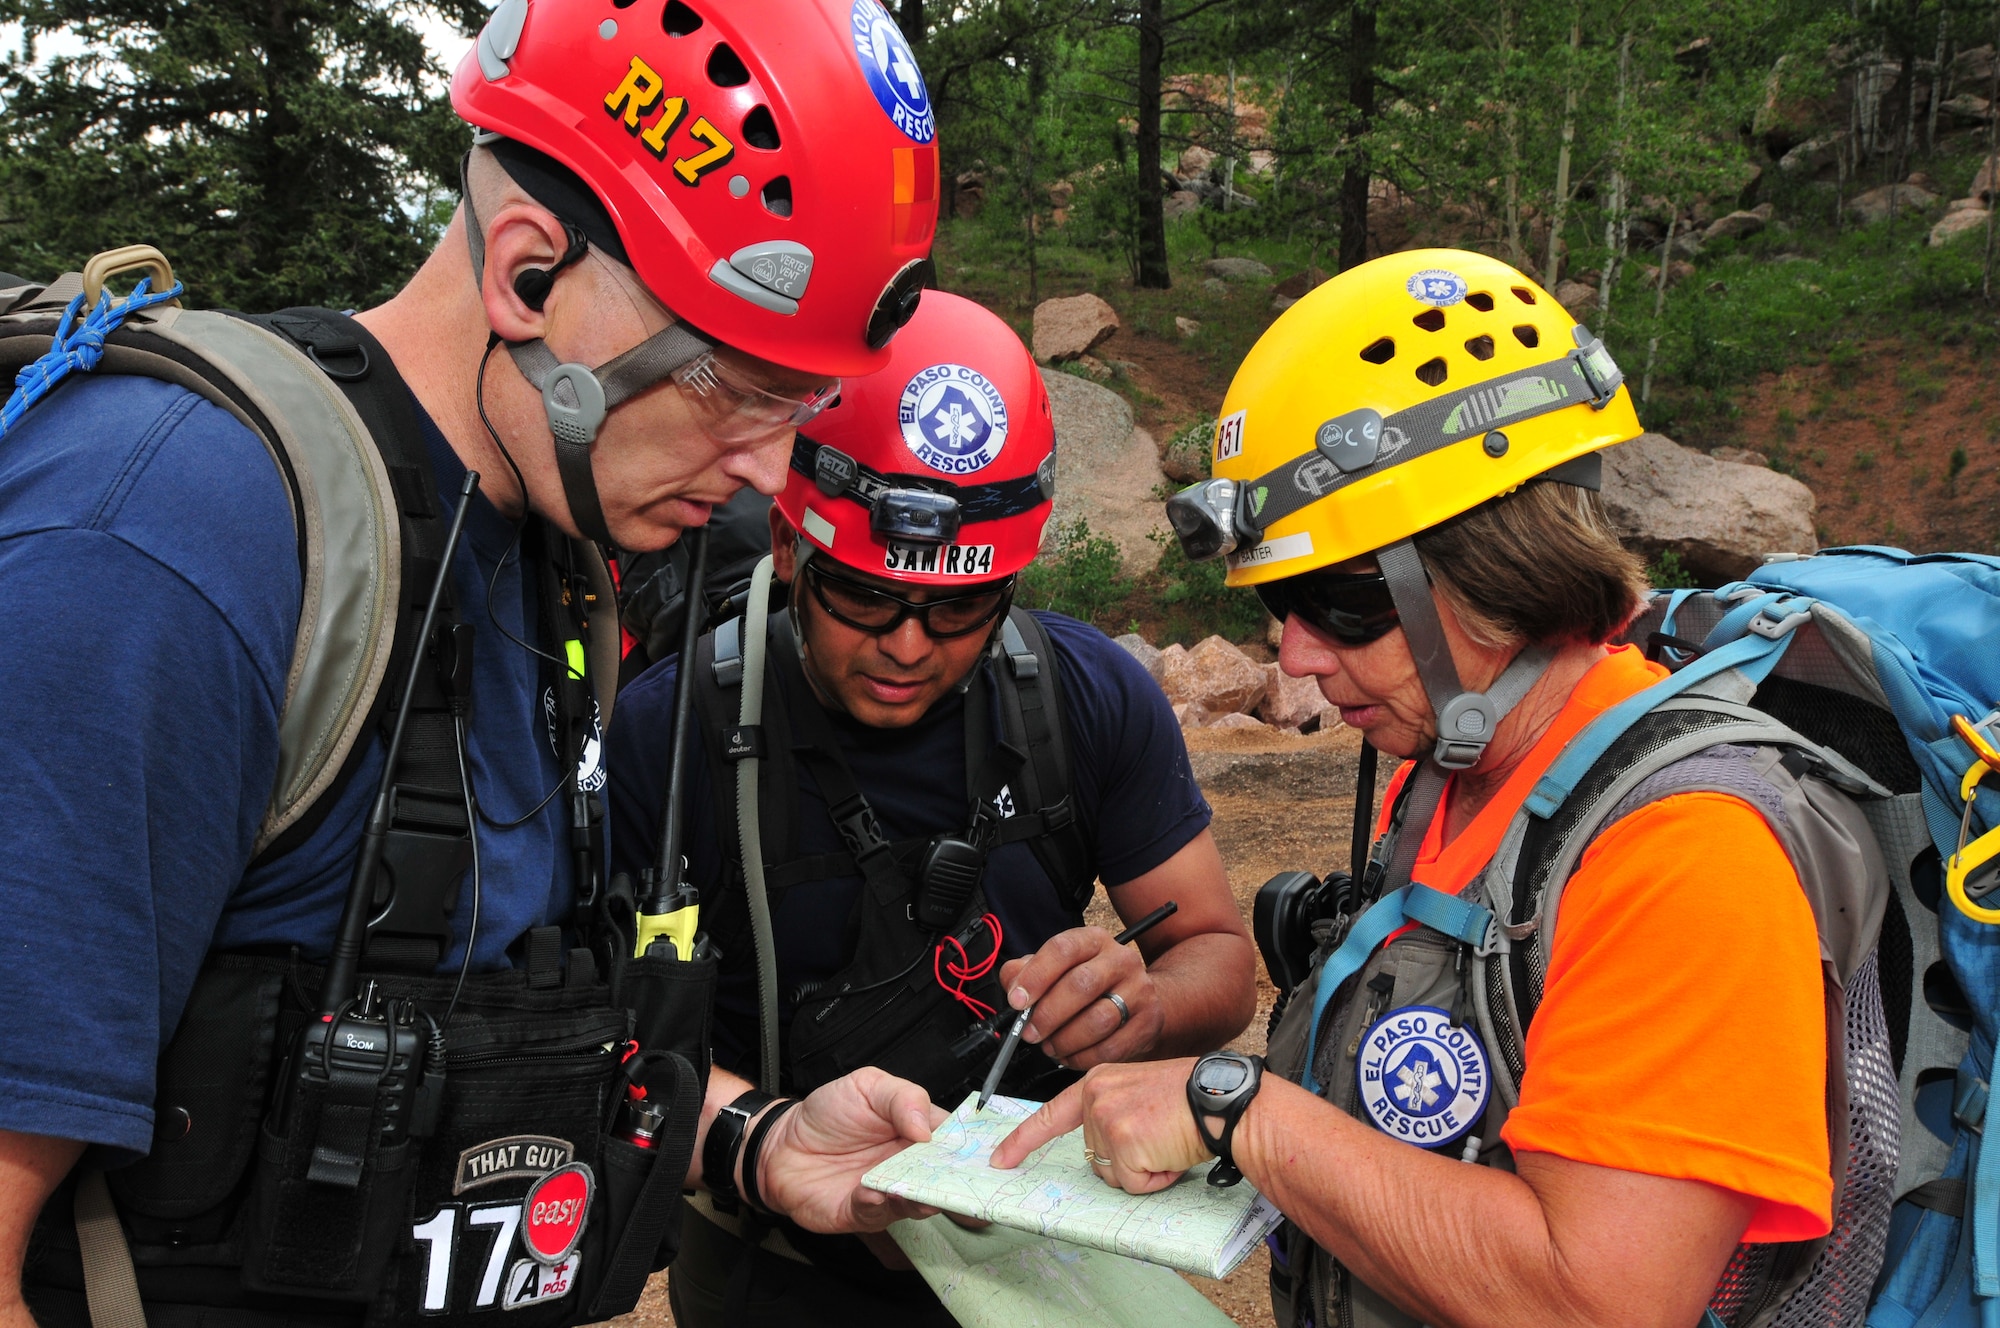 El Paso County Search and Rescue members Eric Babcock (left), Sam Saucedo, and Patty Baxter review a map during a simulated search and rescue mission at the U.S. Air Force Academy in Colo. Springs, Colo., during the Vigilant Guard exercise, July 22, 2013. The Vigilant Guard exercise is a weeklong exercise full of scenarios based on wildfires, tornadoes, air craft accidents, hazmat response, search and rescue, triage, medevac and other emergency-response measures. The training and experience gained from this exercise will provide the Colorado National Guard and supporting military units an opportunity to improve cooperation and operational relationships with their local, state, private sector, non-governmental organizations and federal partners. (U.S. Air National Guard photo by Tech. Sgt. Wolfram M. Stumpf)